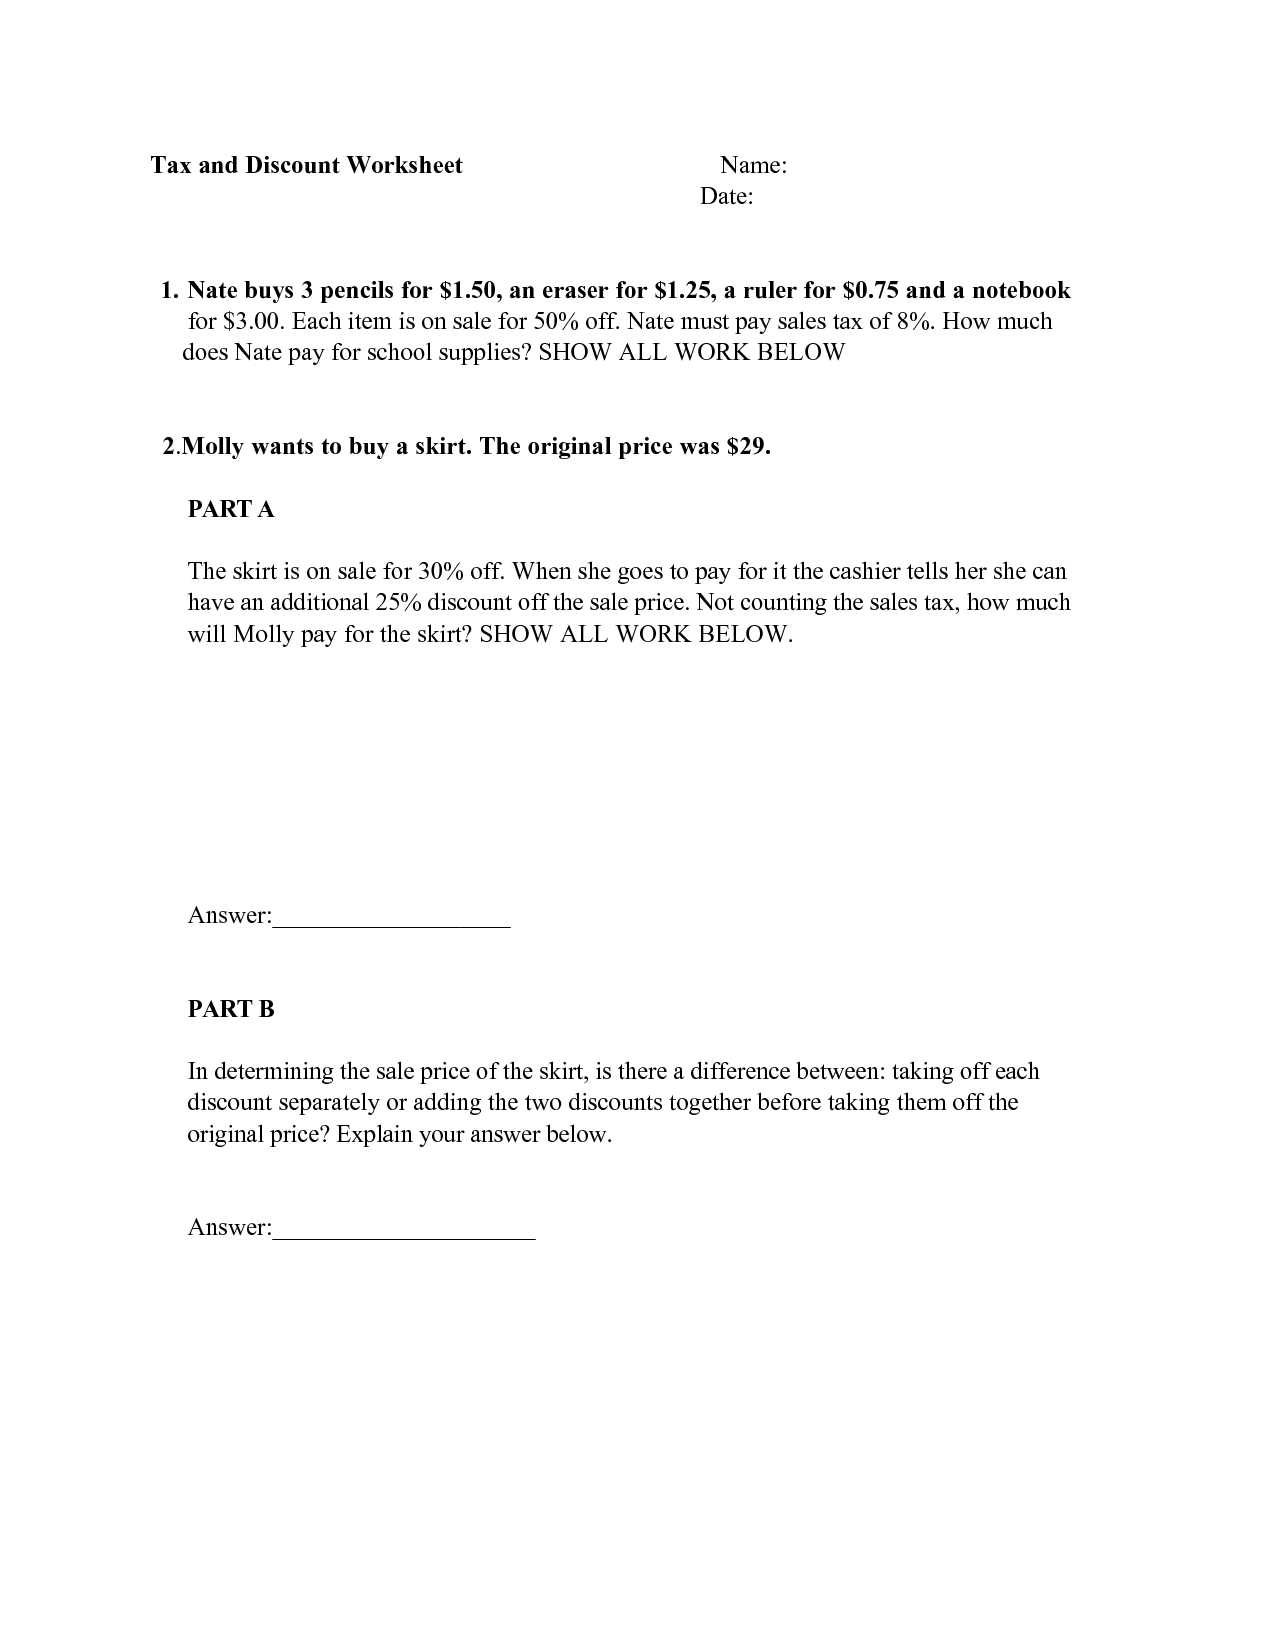 Taxation Worksheet Answers as Well as Code Line Math Worksheet Download